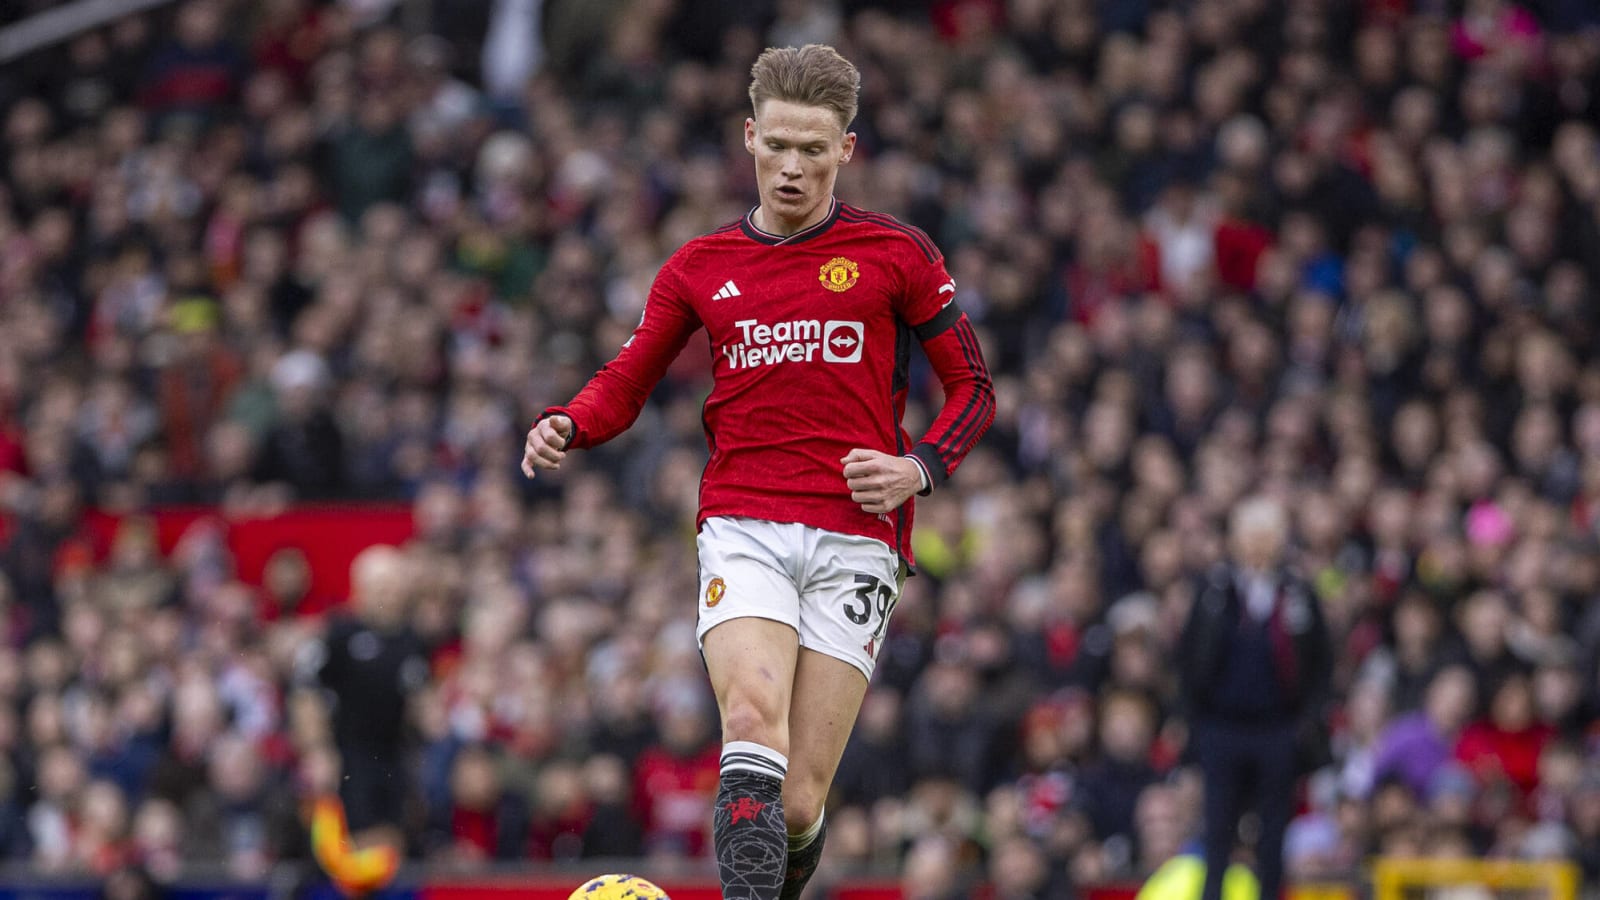 Man United tipped to use midfielder in attack after the injury of Rasmus Hojlund